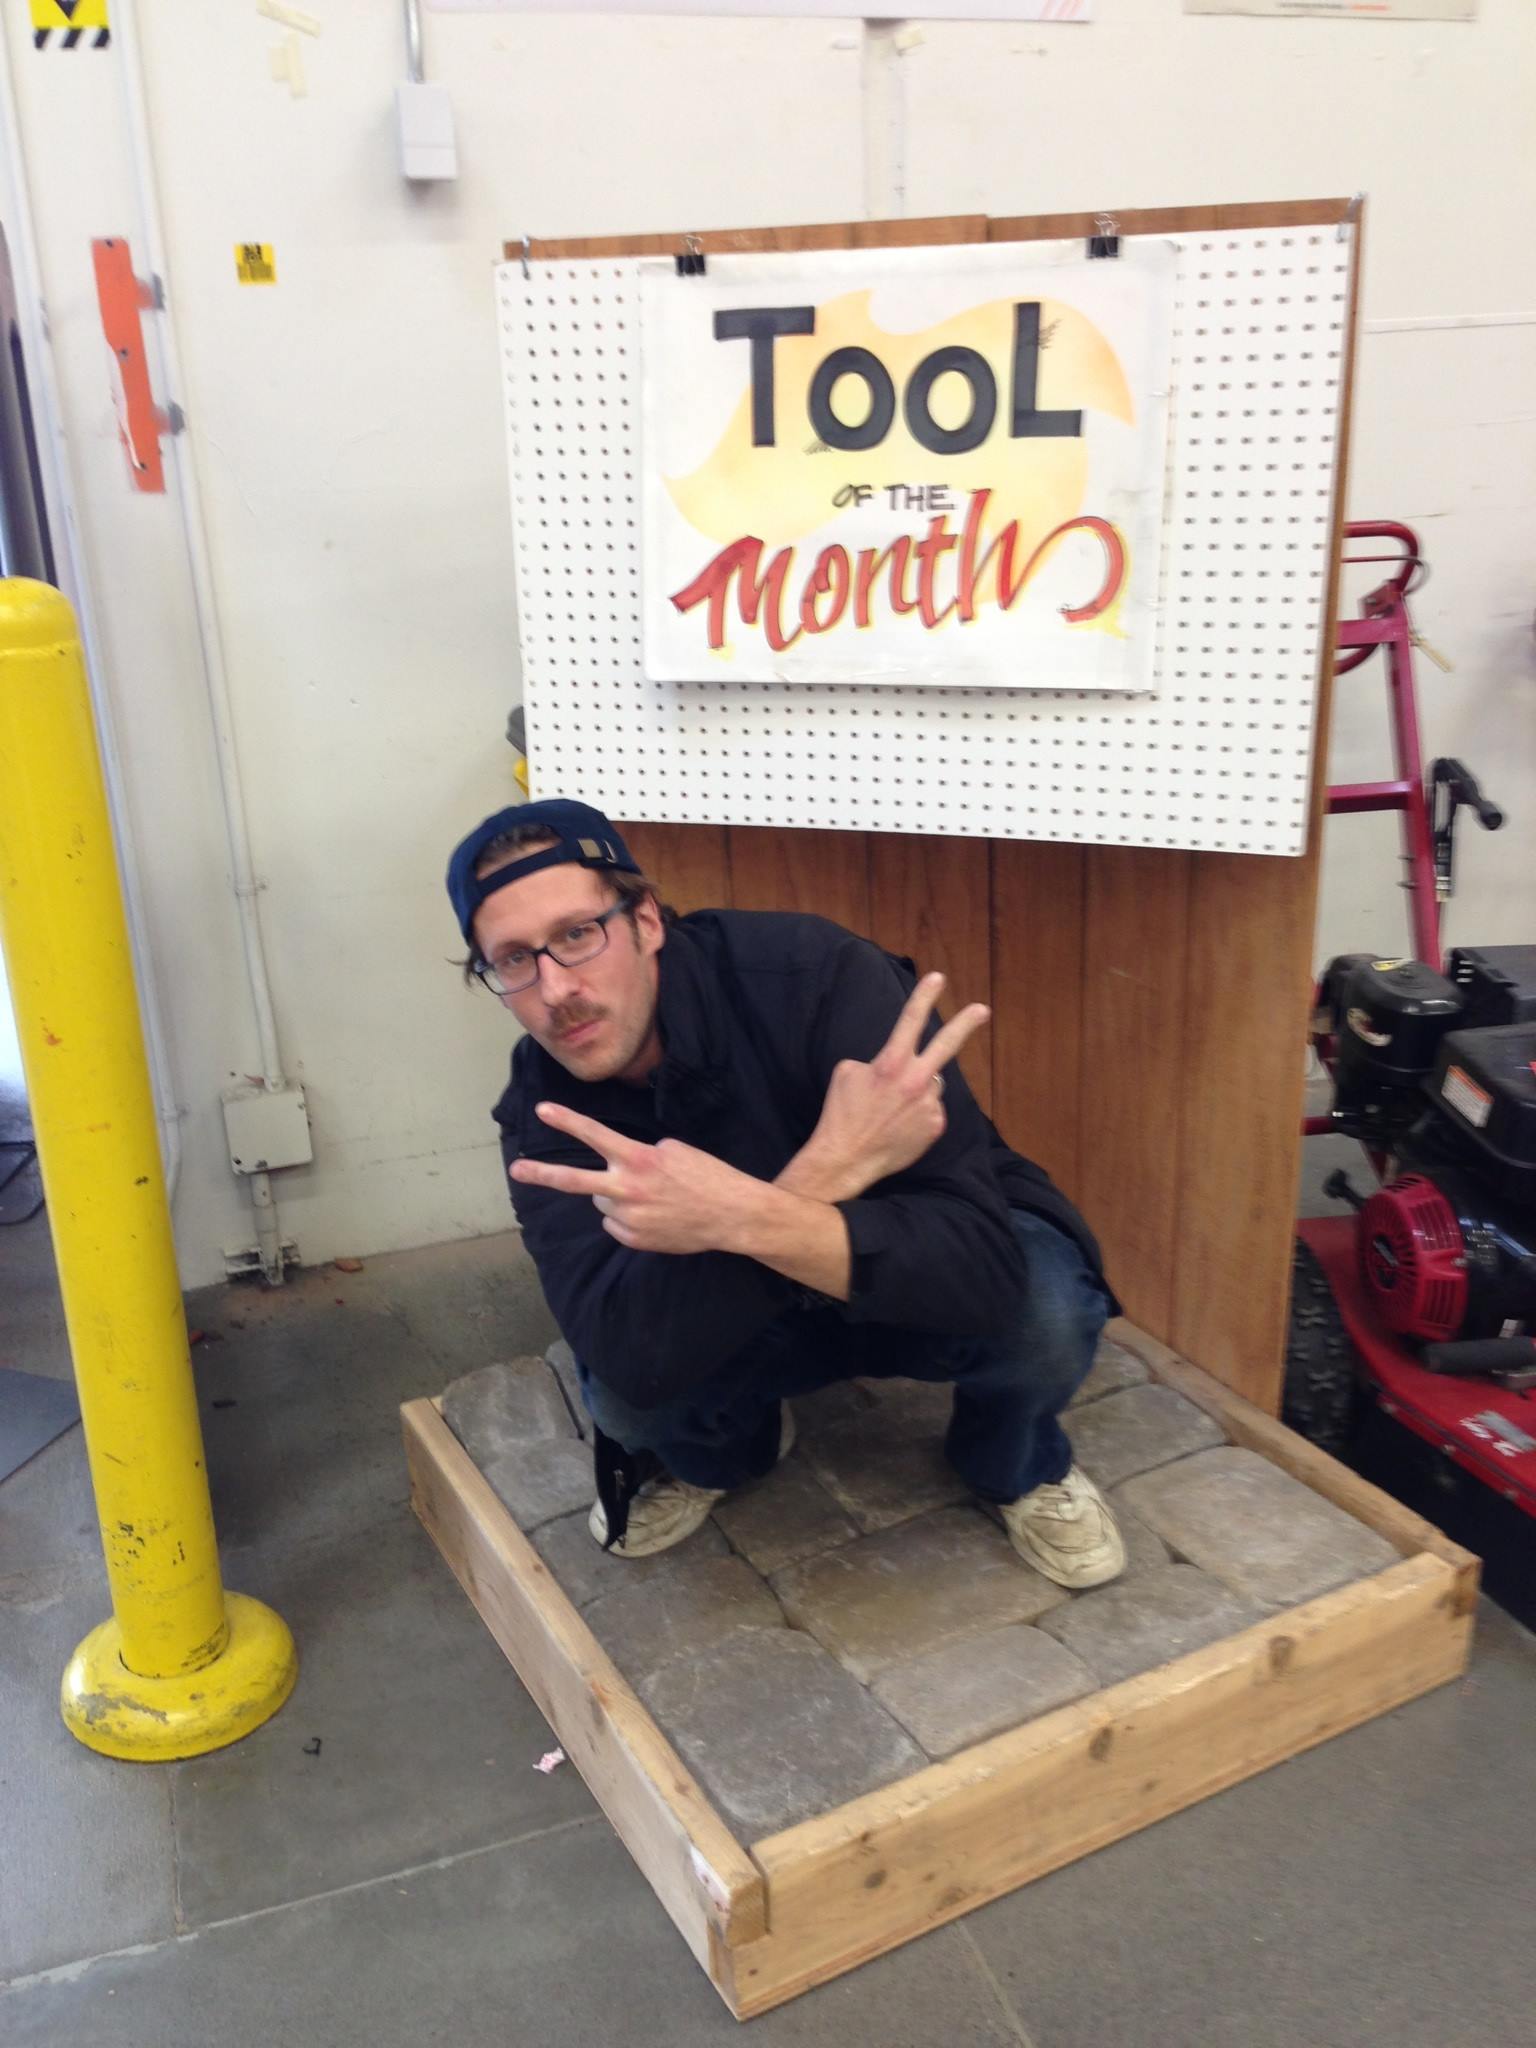 Home depot tool of the month